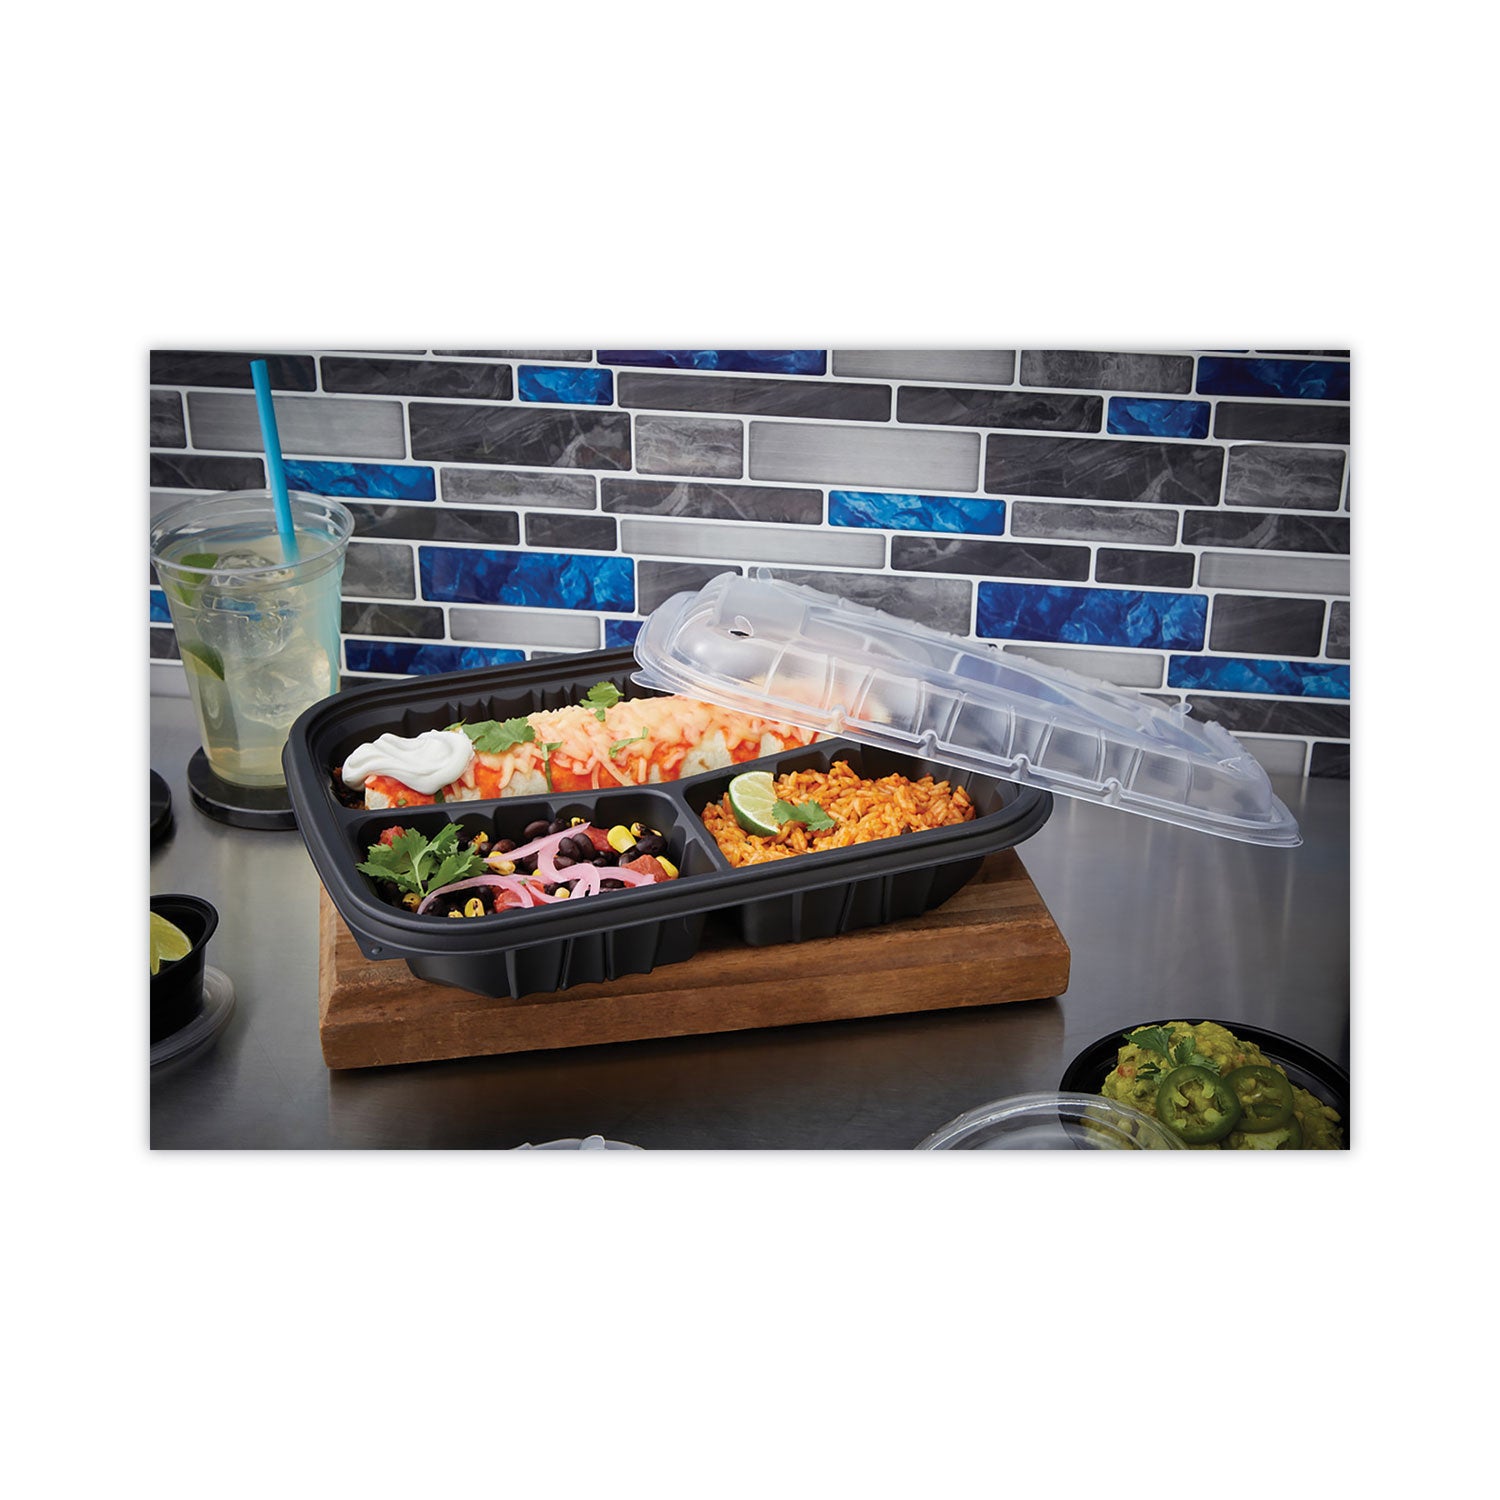 earthchoice-entree2go-takeout-container-3-compartment-48-oz-1175-x-875-x-213-black-plastic-200-carton_pctycnb12x95203 - 2